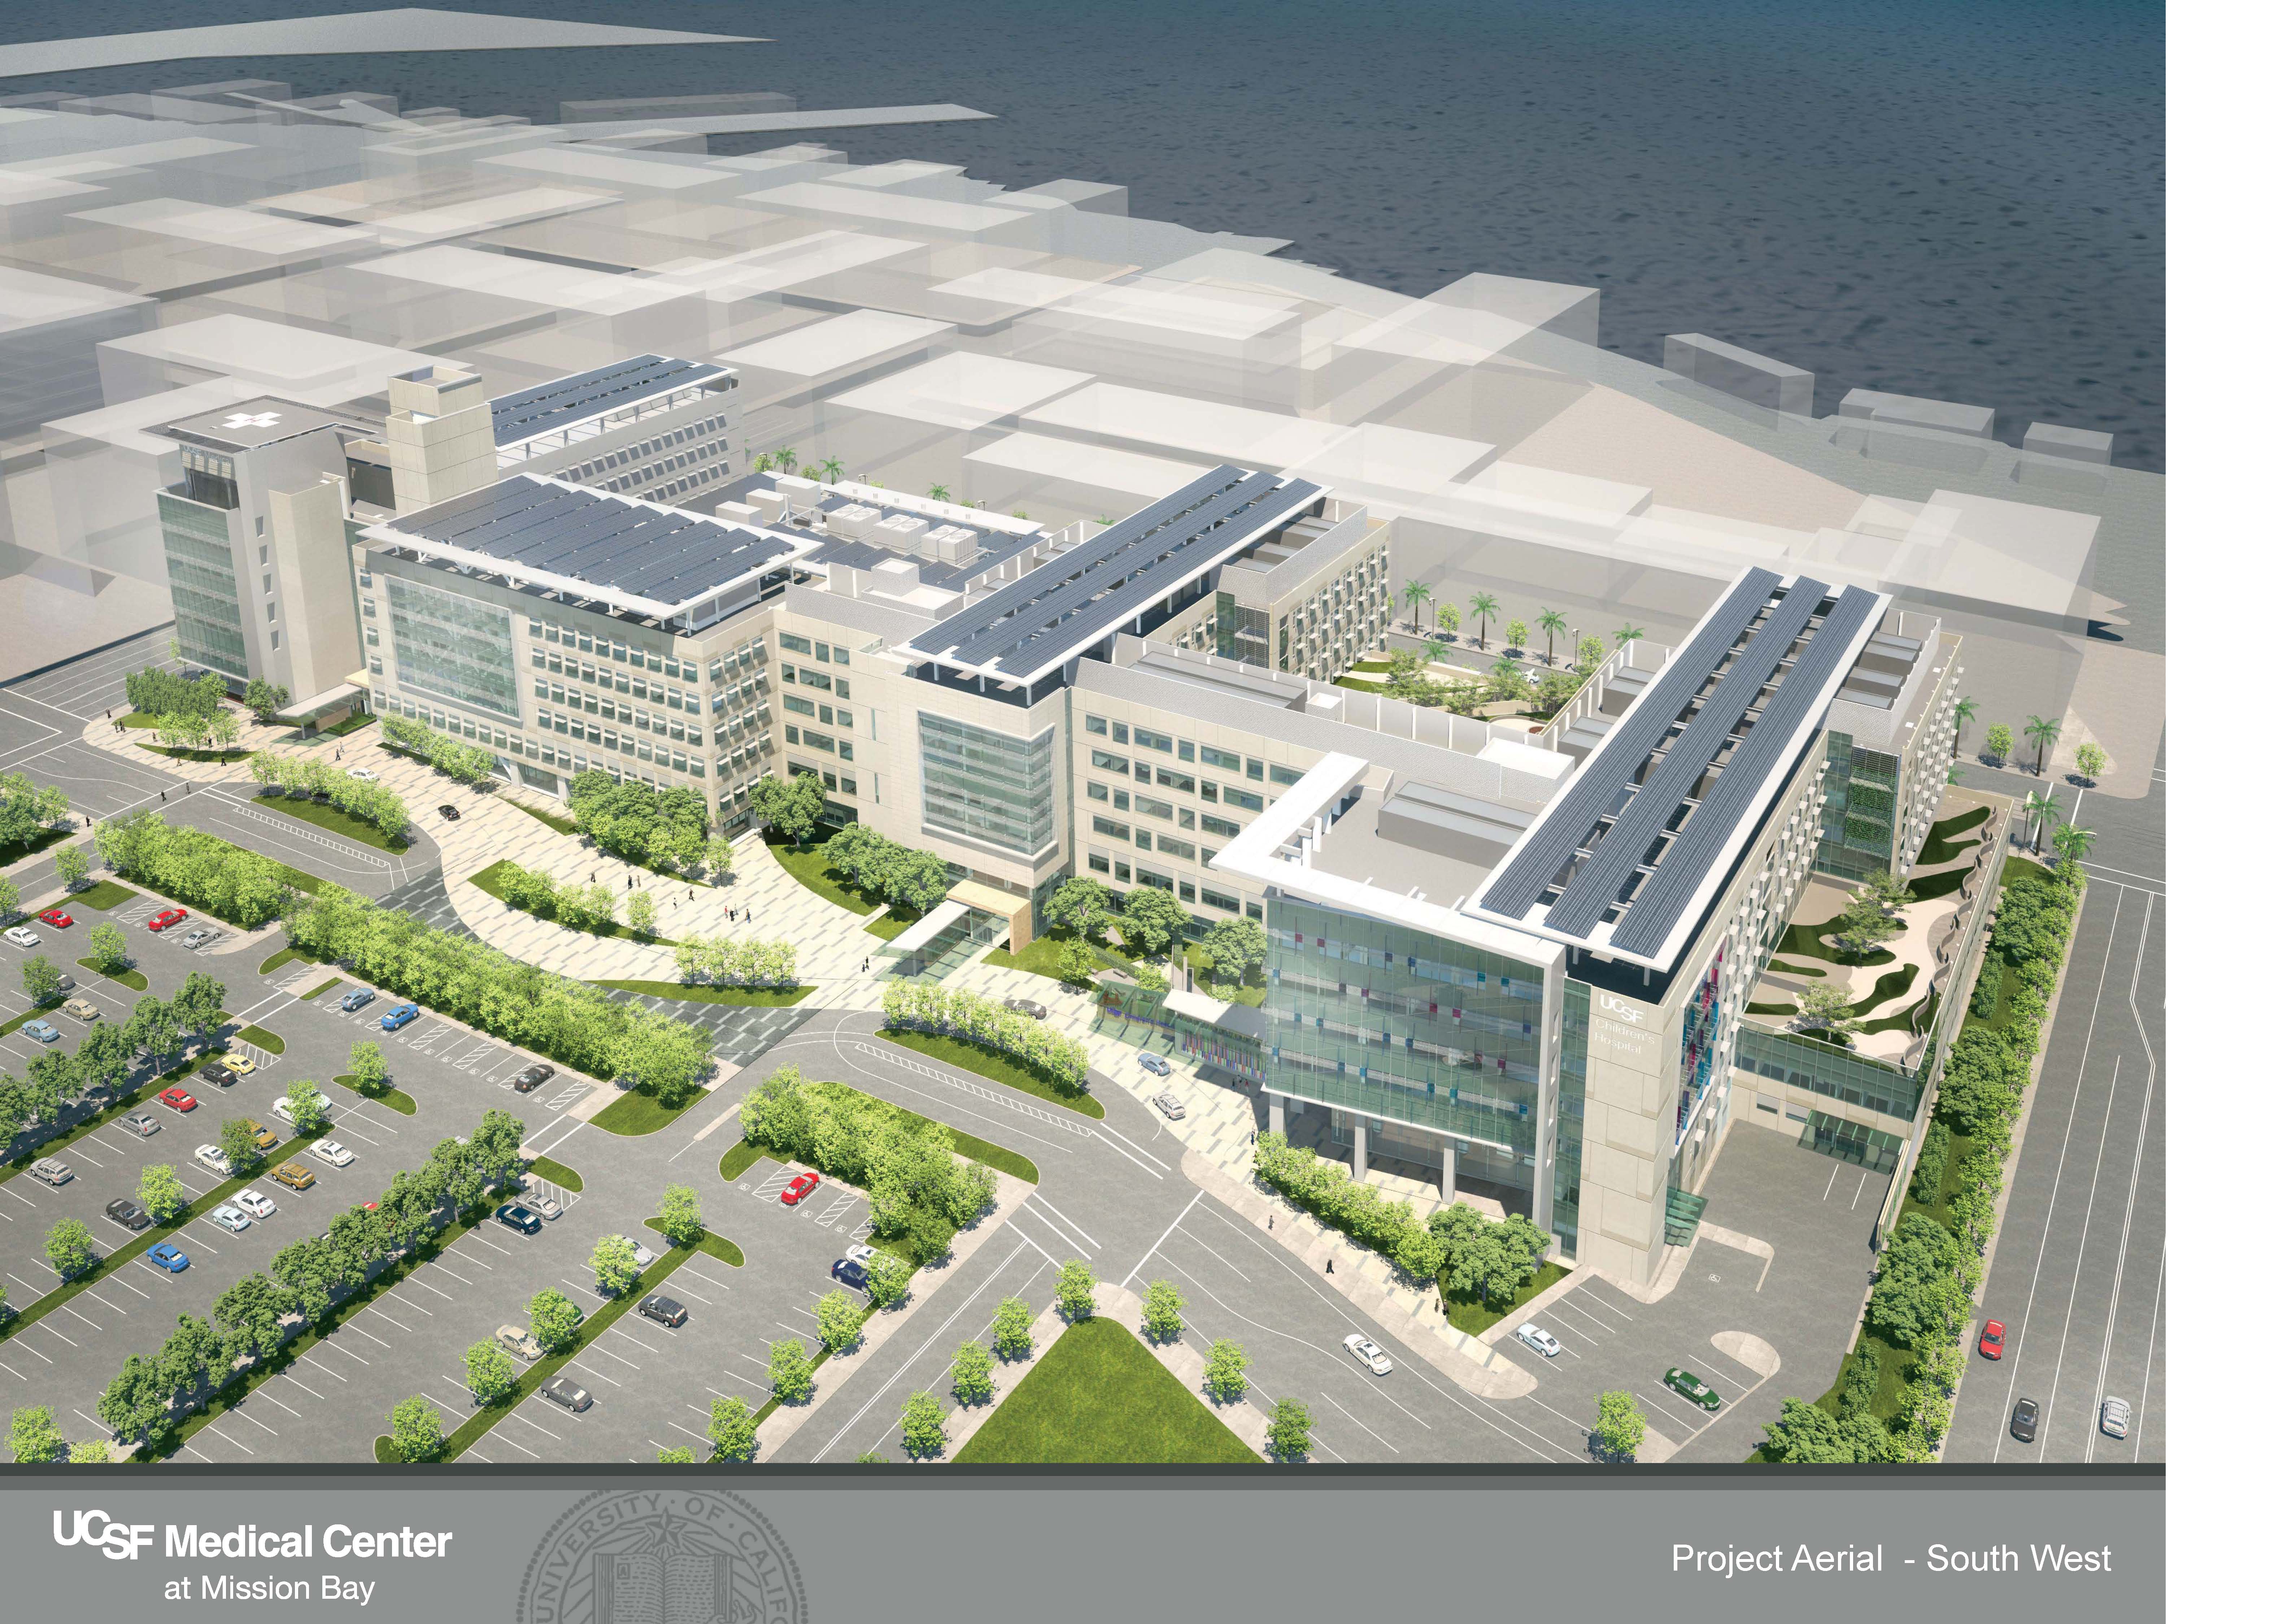 UCSF medical facility to use ‘smart’ technology, meet LEED Gold